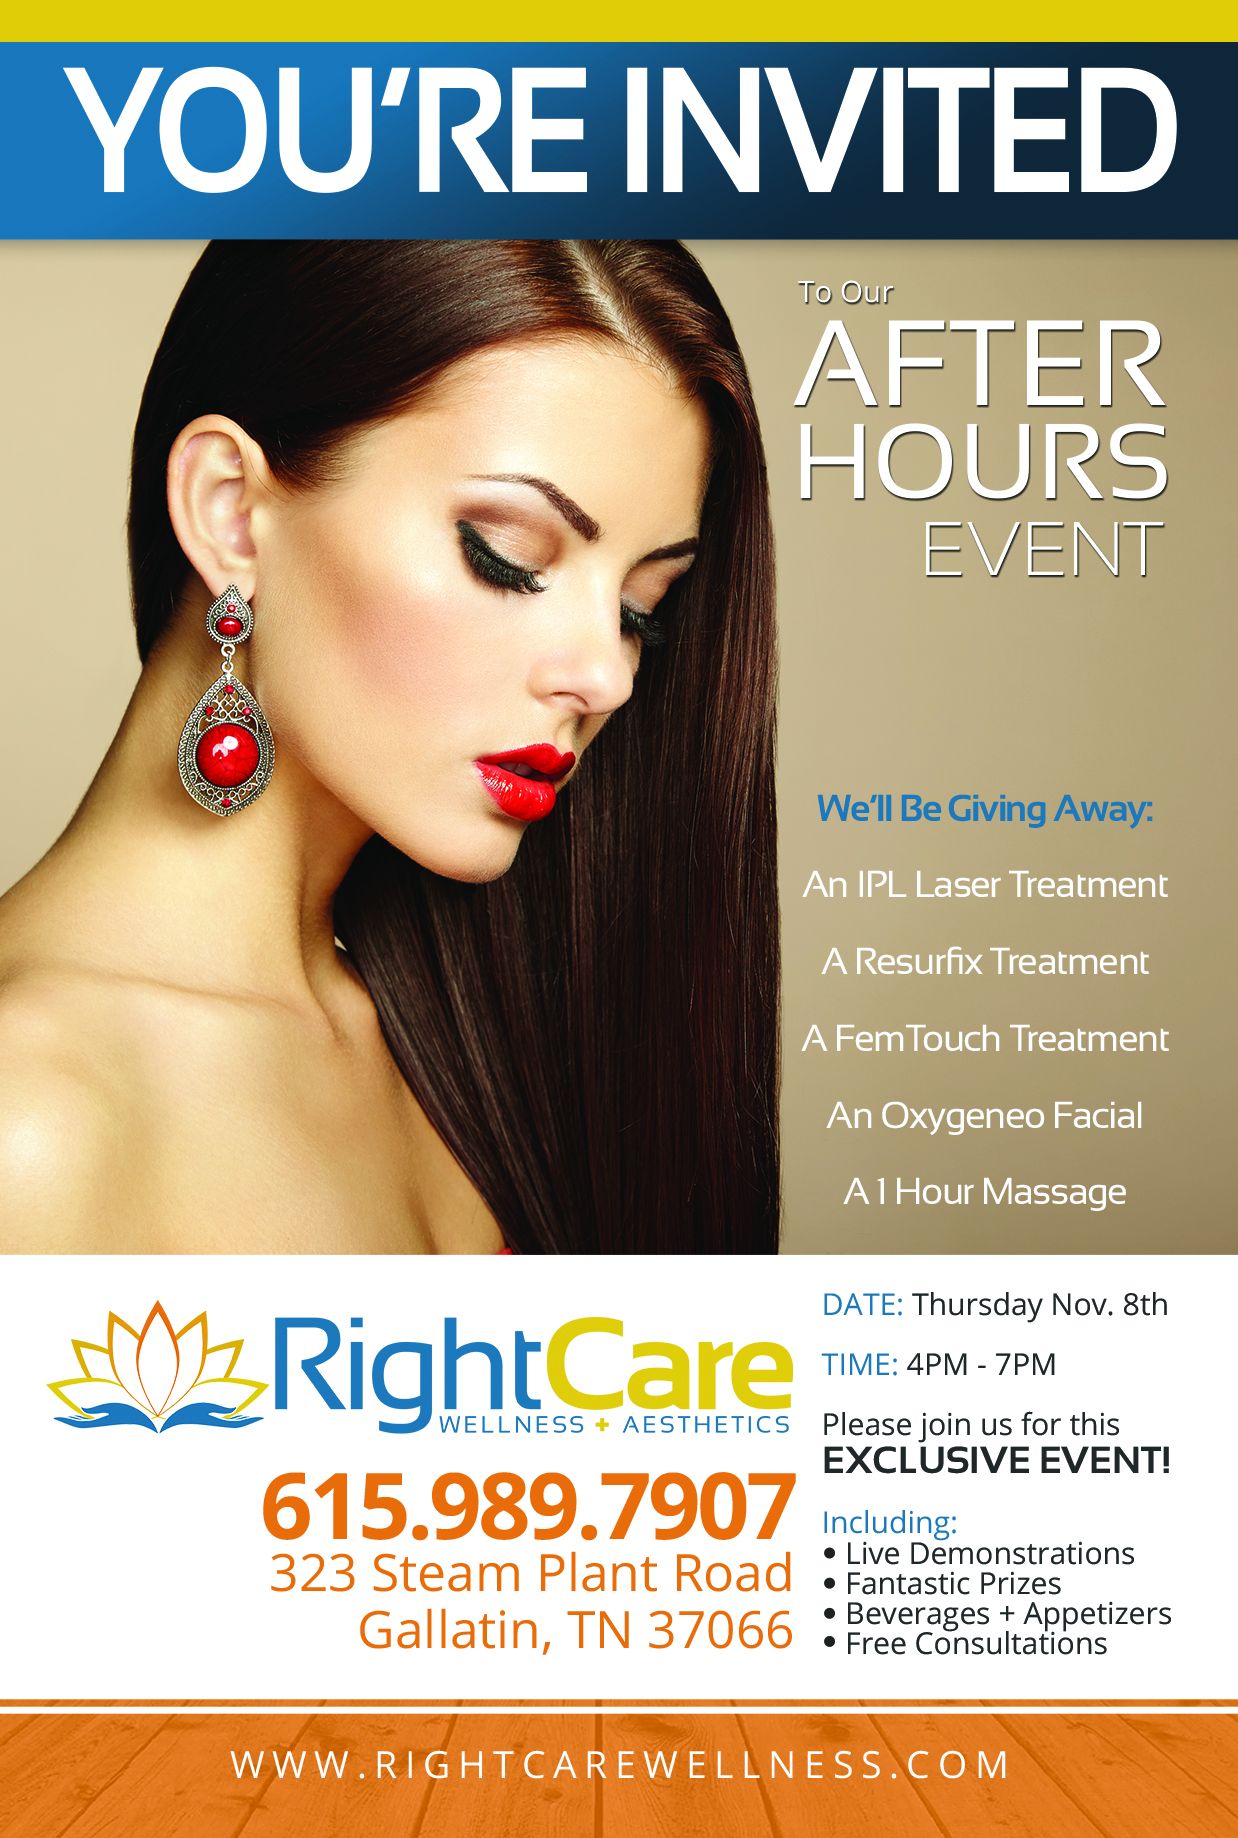 Get Free Consultations and Skin Treatments in our AFTER-HOURS Event!